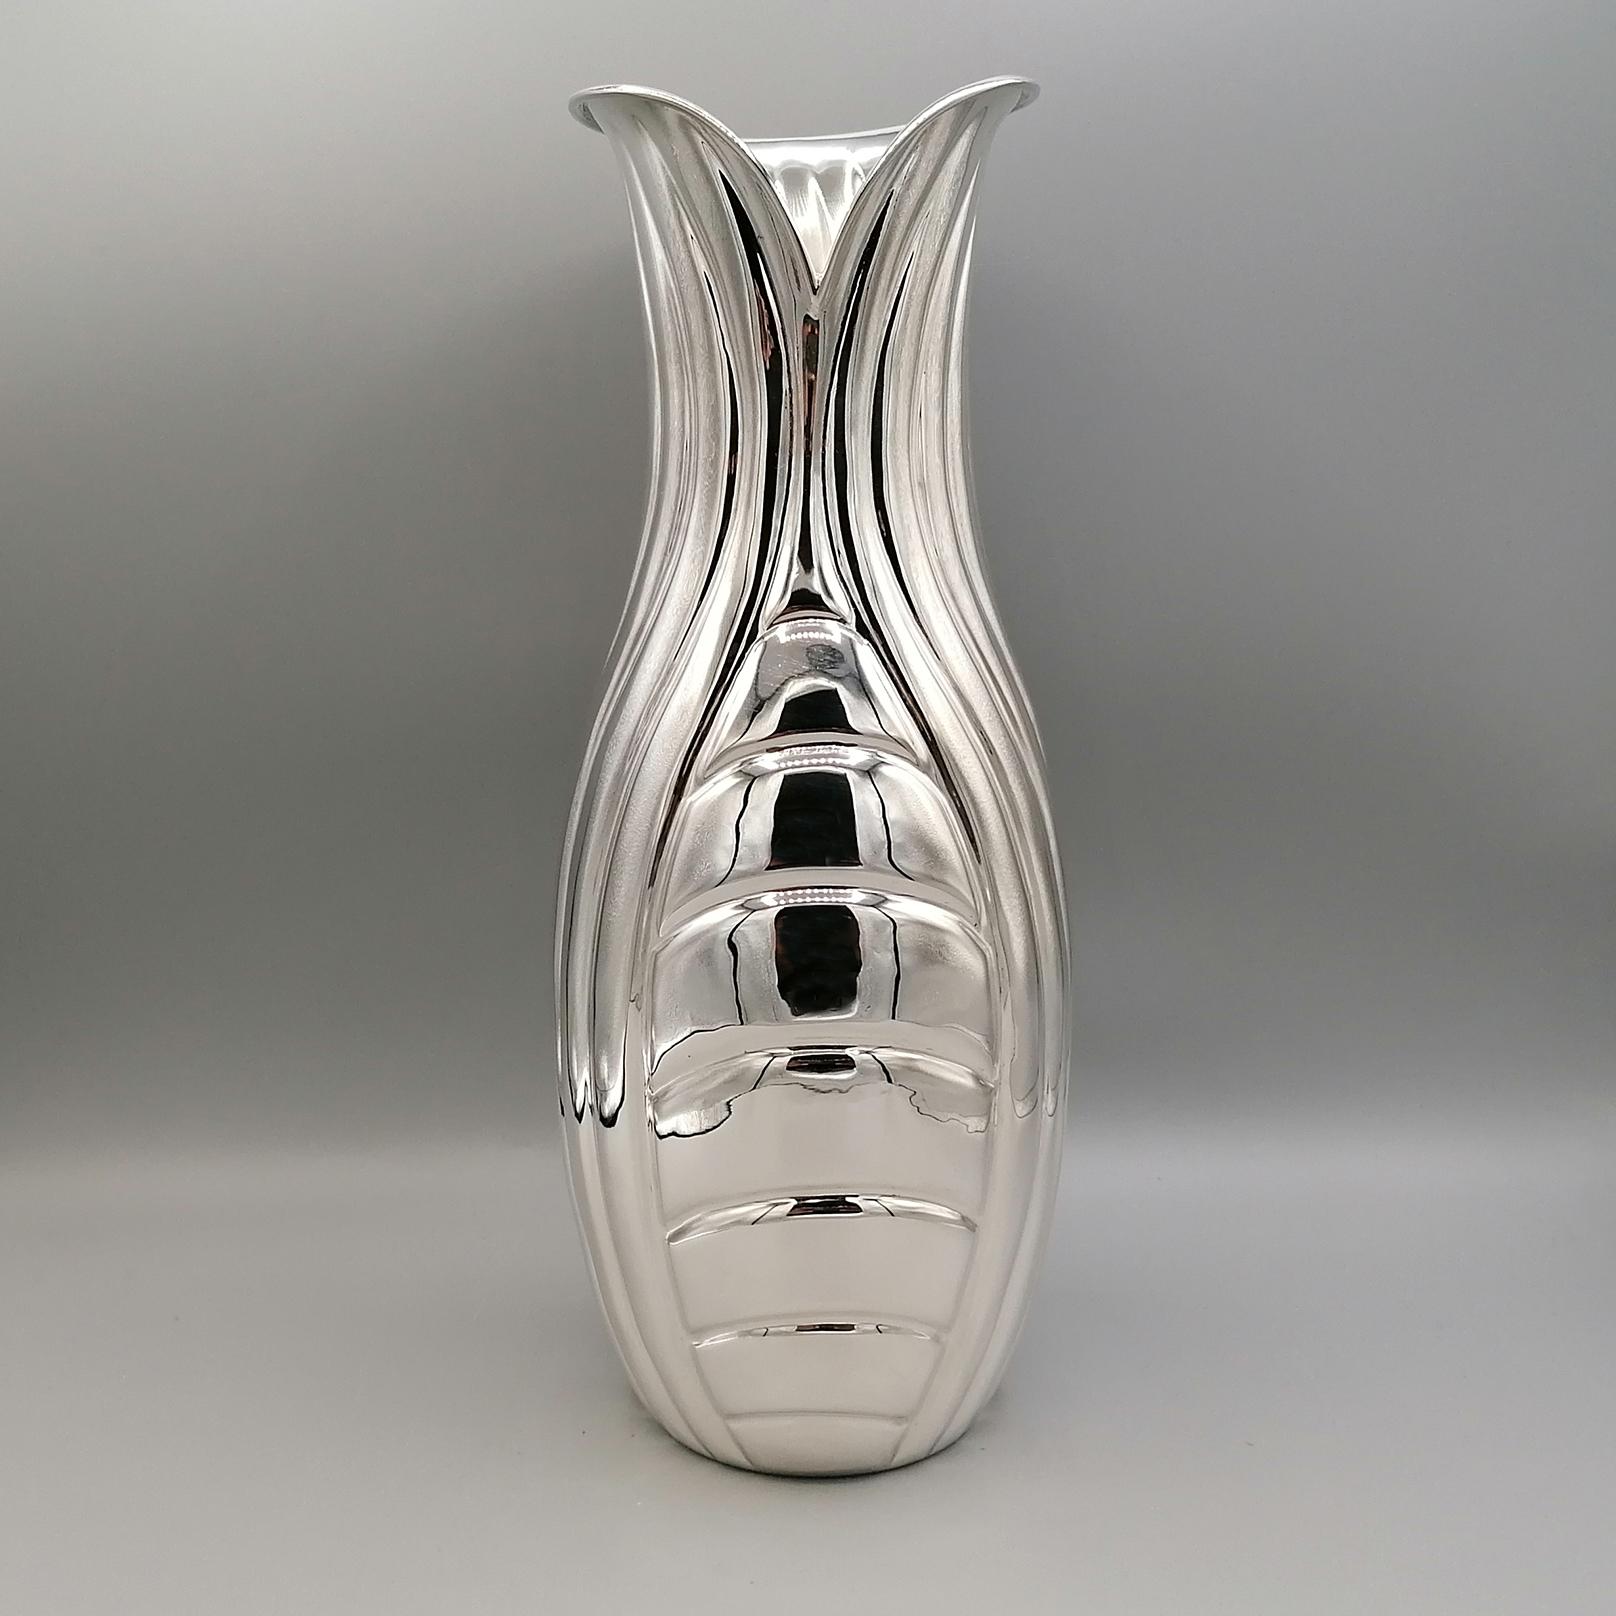 800 solid silver vase completely handmade.
The body of the vase was modeled and shaped by obtaining it from a silver sheet.
The mouth of the vase has been flared and shaped in the shape of a 